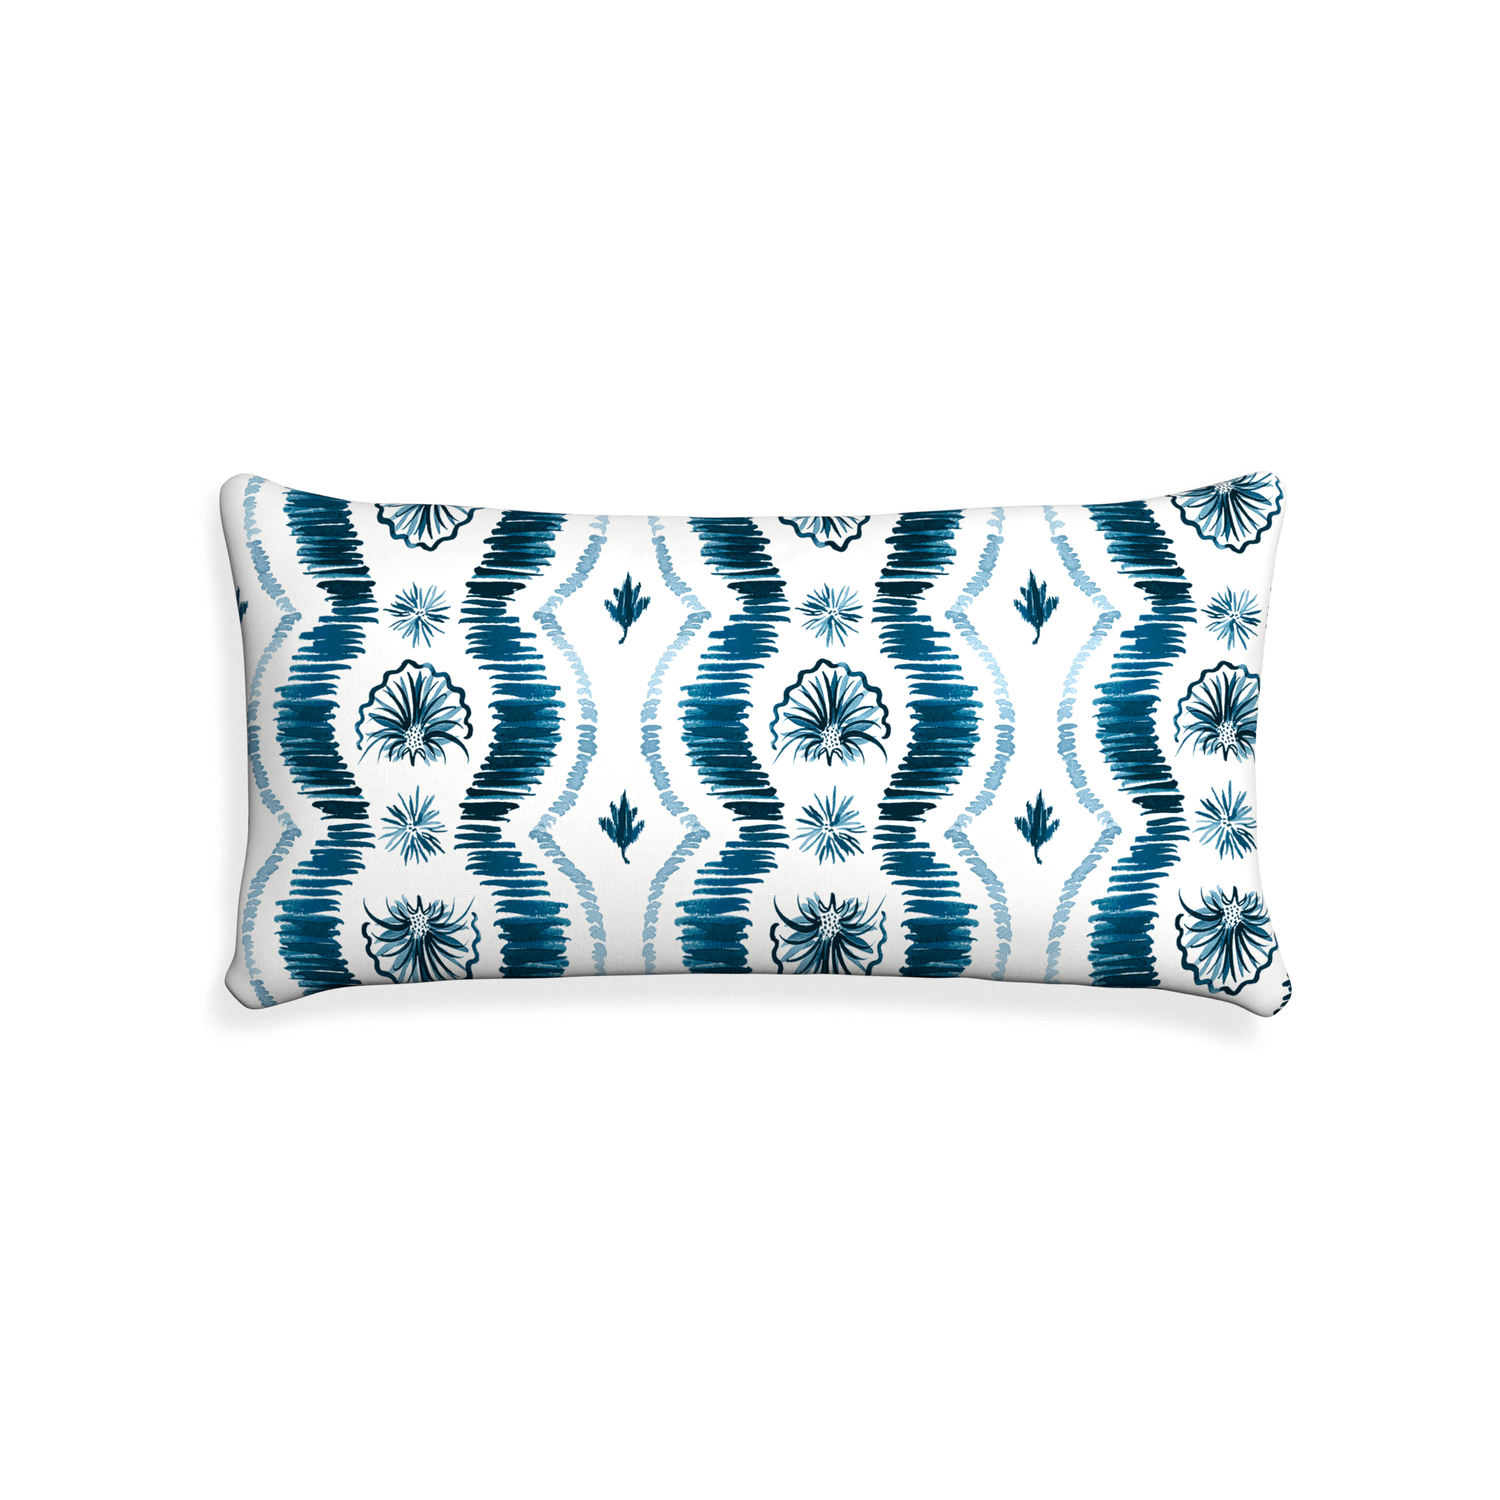 Midi-lumbar alice custom blue ikatpillow with none on white background